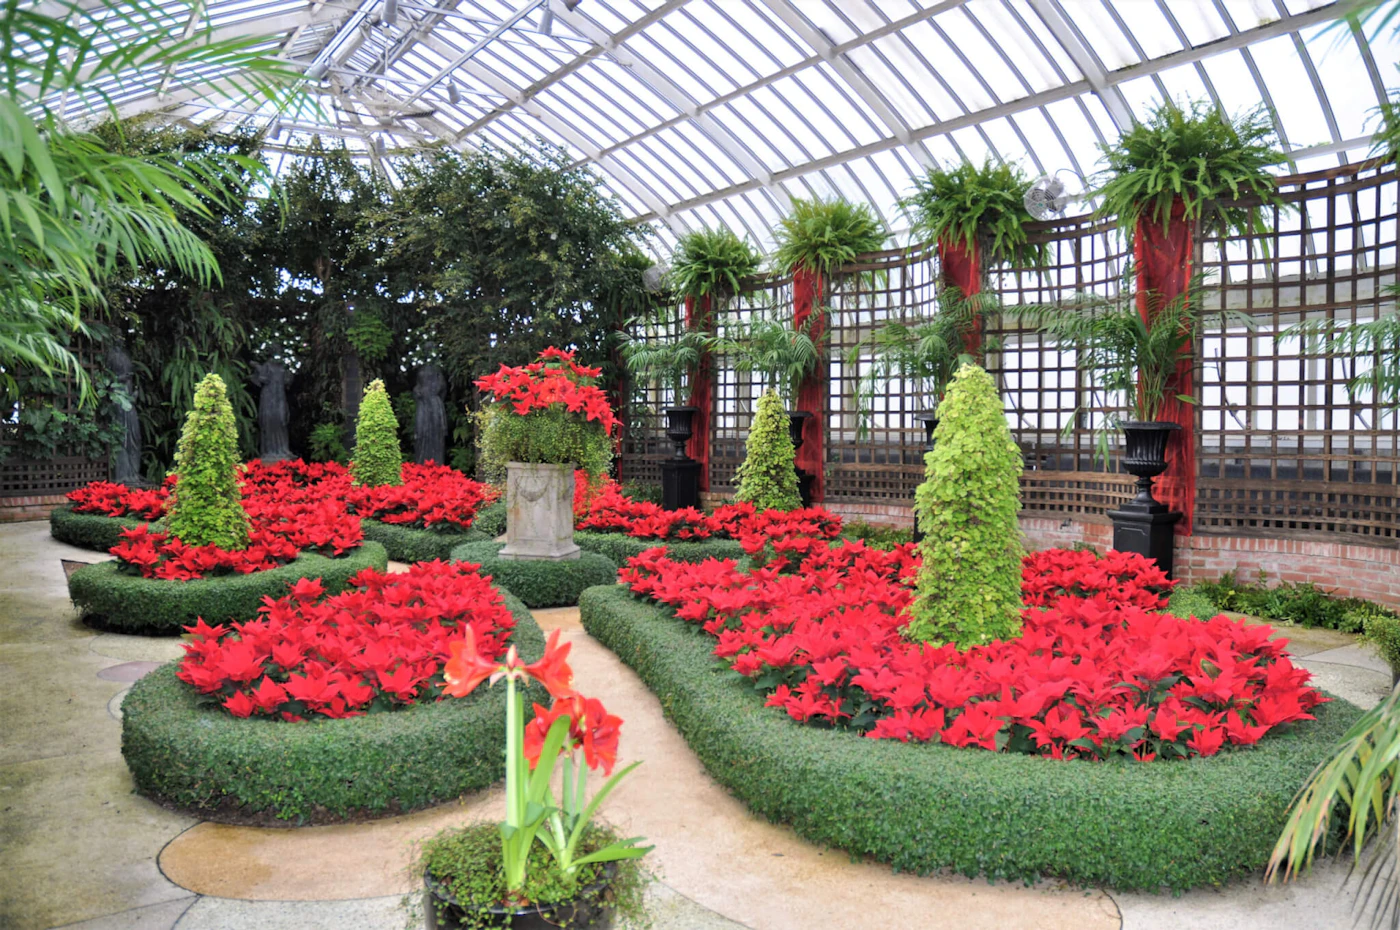 A visit to the Winter Flower Show at Phipps Conservatory will include beautiful sights and a floating carousel on a pond. (Shutterstock Photo/StacieStauffSmith Photos)